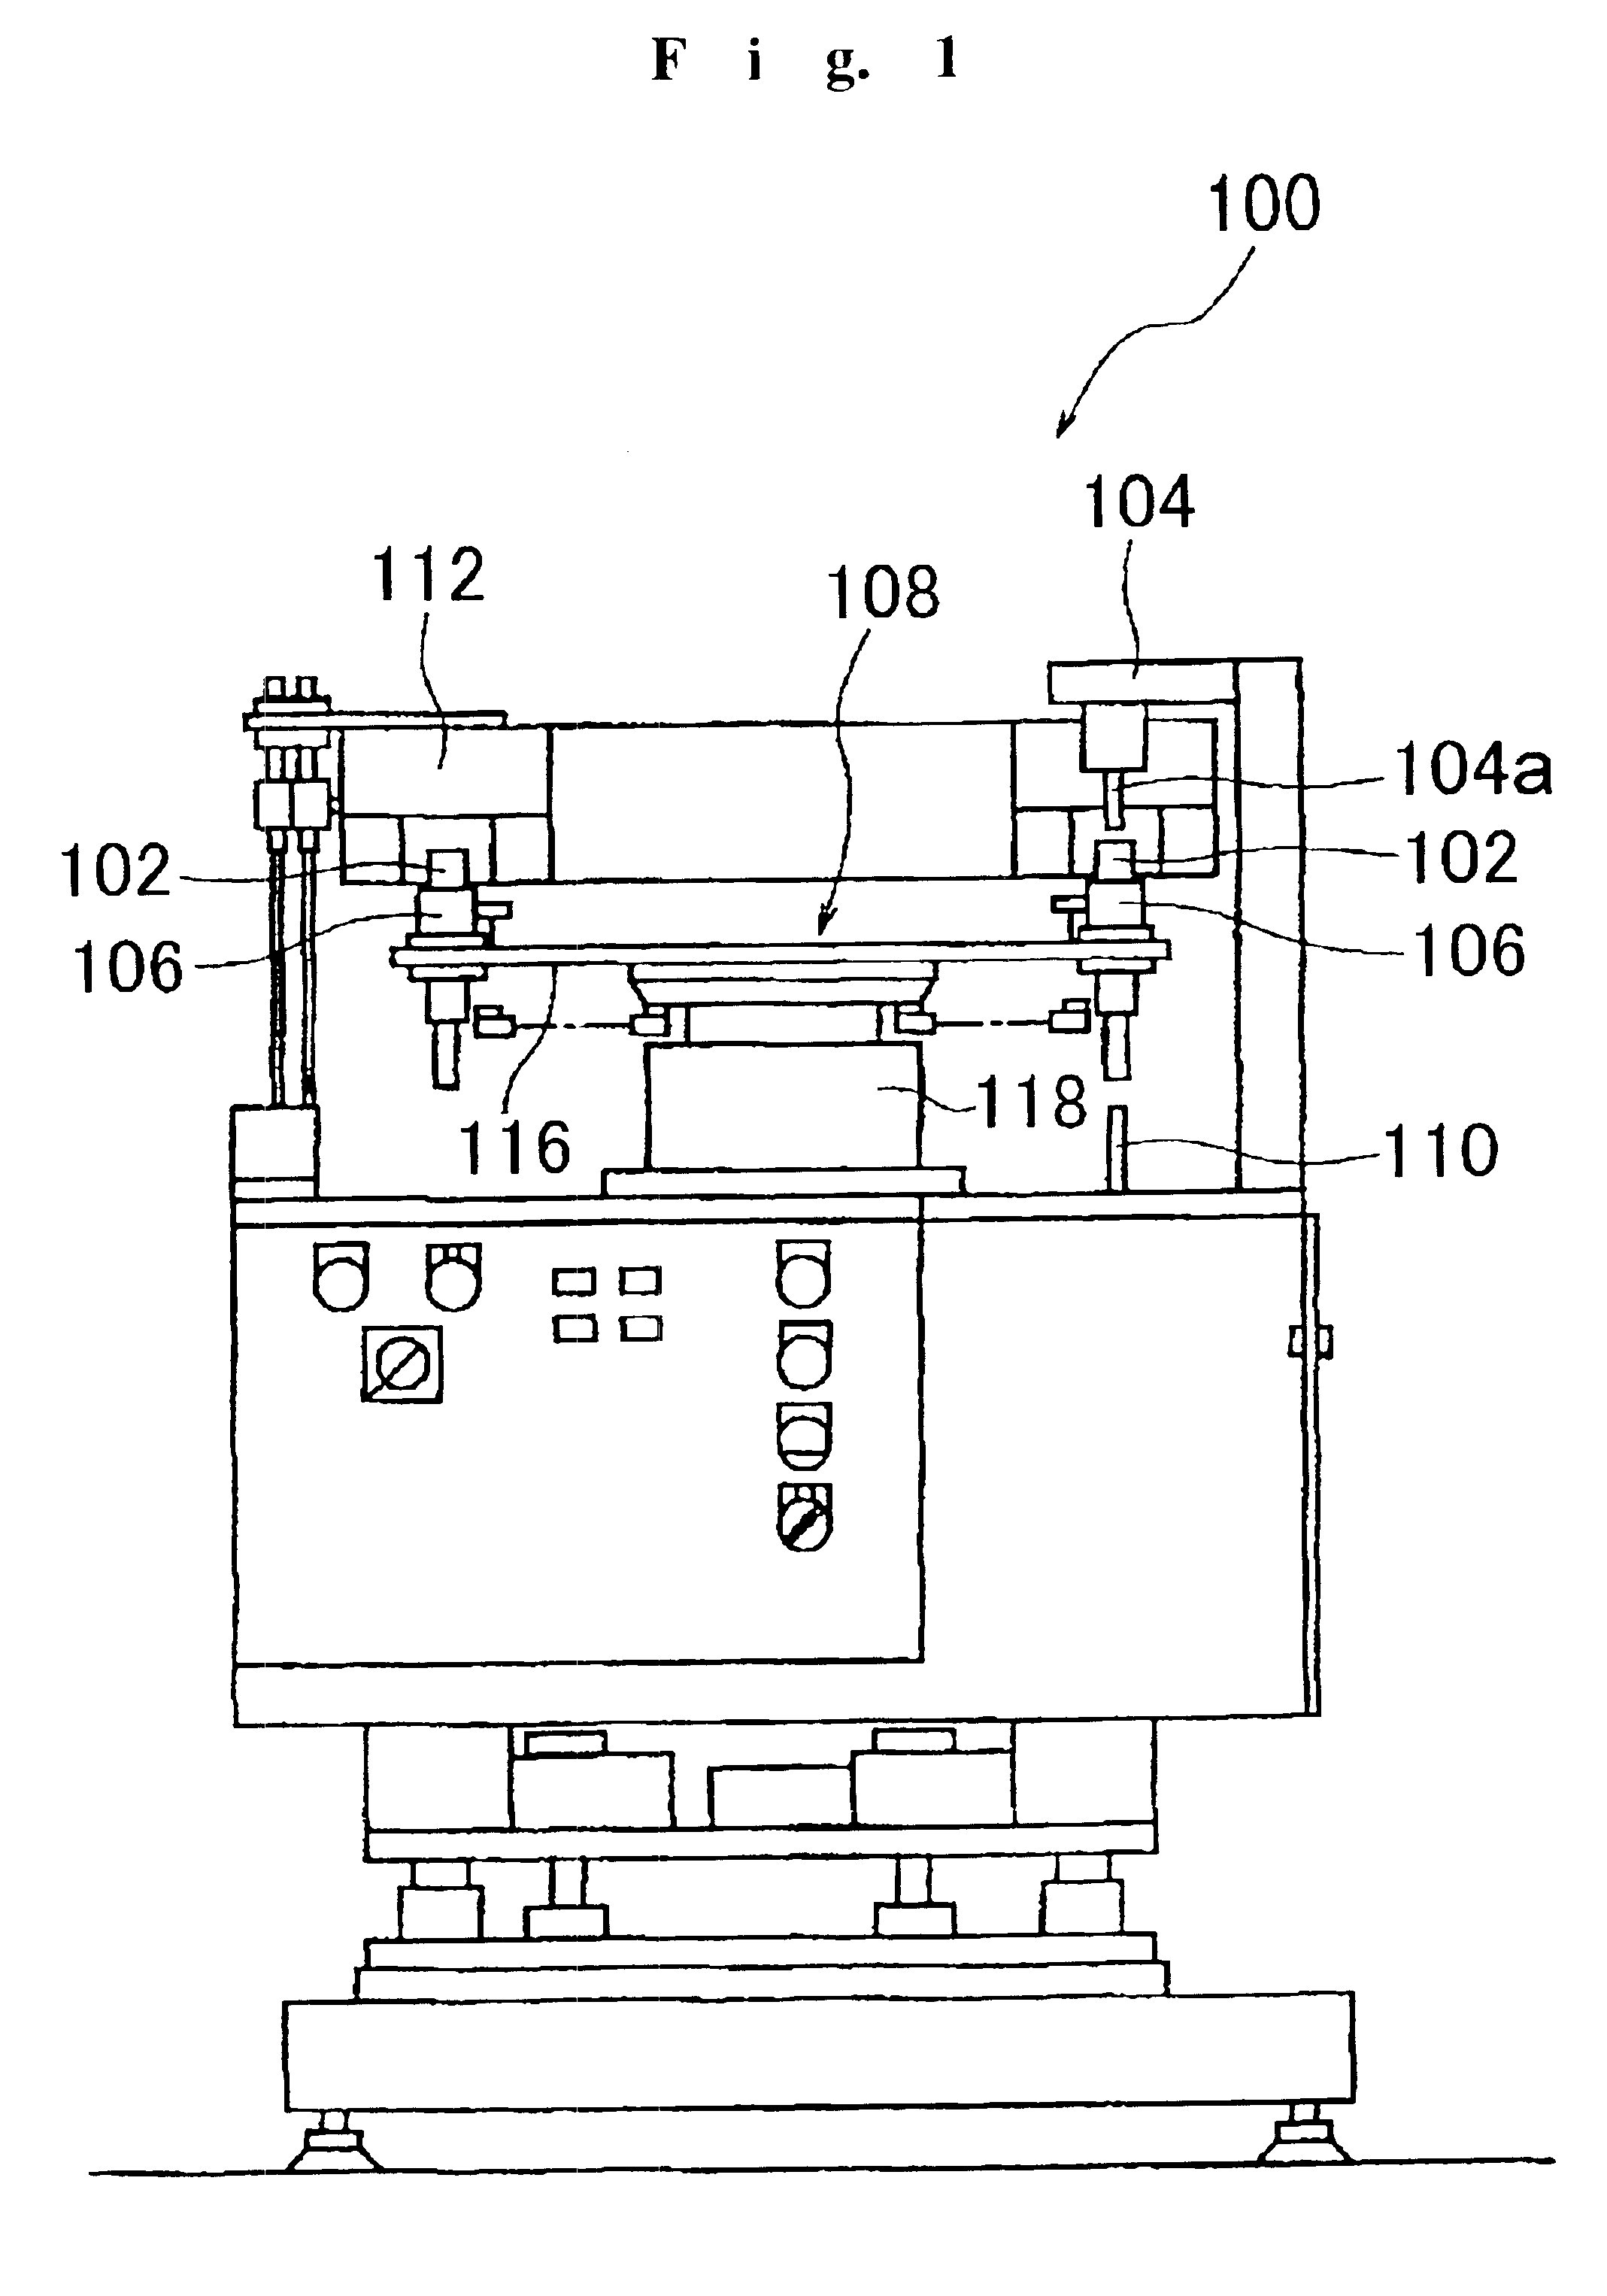 Method of manufacturing glass gobs molded glass articles, and optical elements